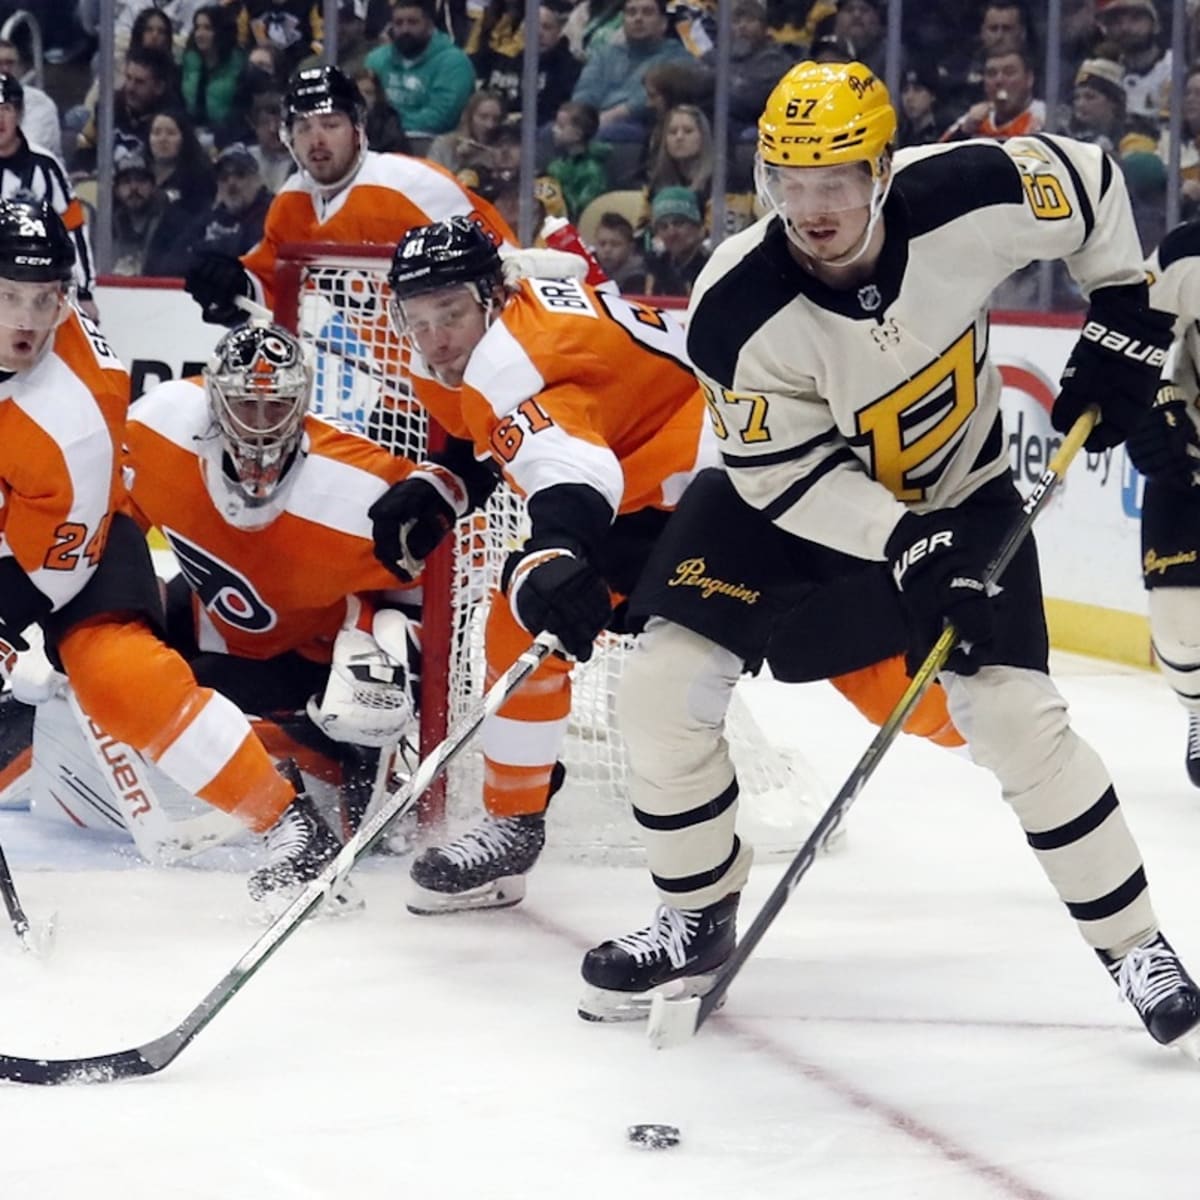 Shuffled Lines Paying Off for the Pittsburgh Penguins